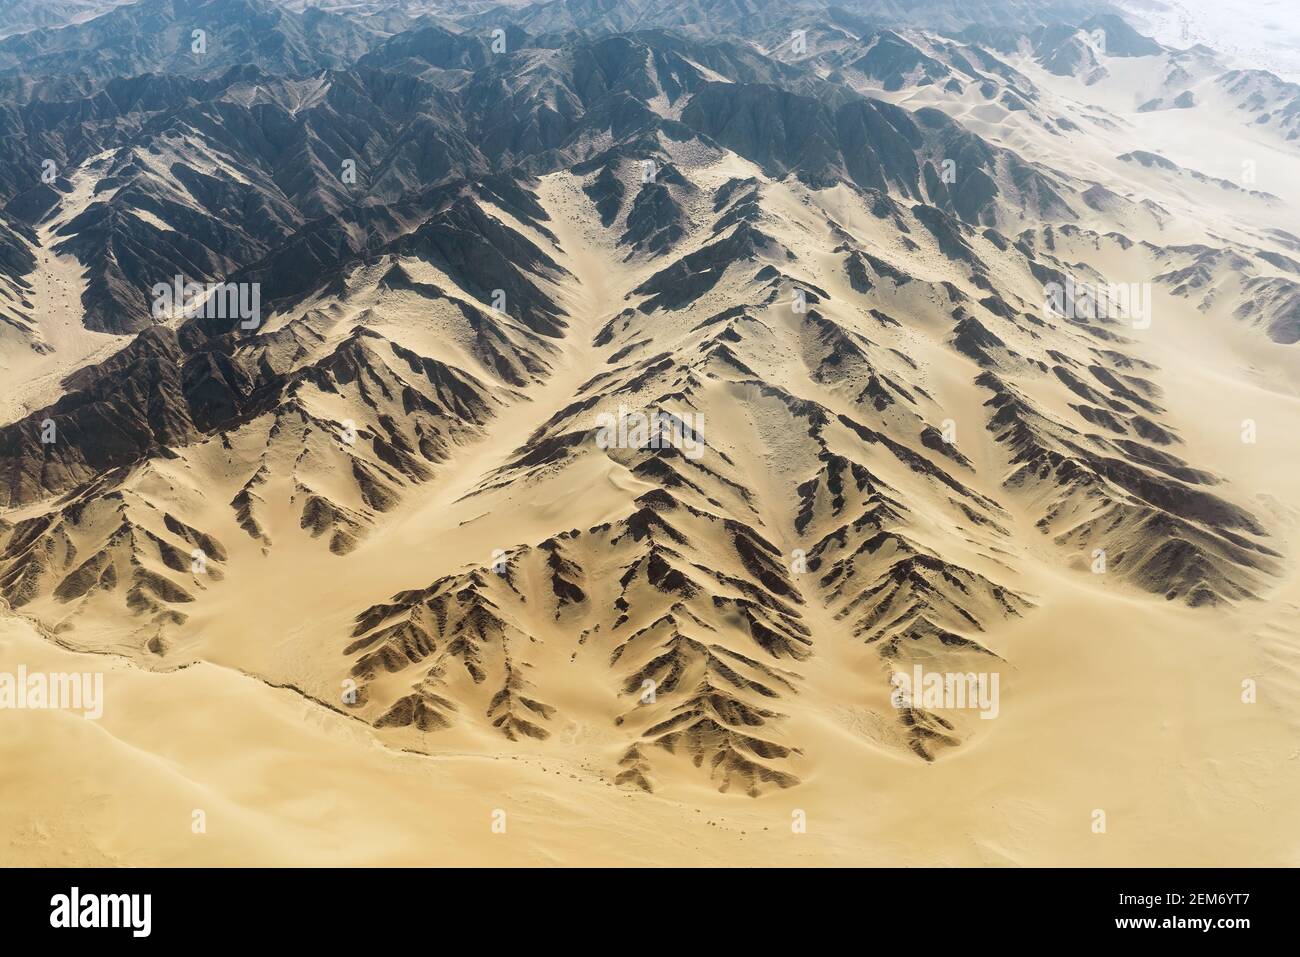 Aerial landscape of the border where the Nazca Desert with Nazca Lines ends and the Andes mountain range begins, Peru. Stock Photo